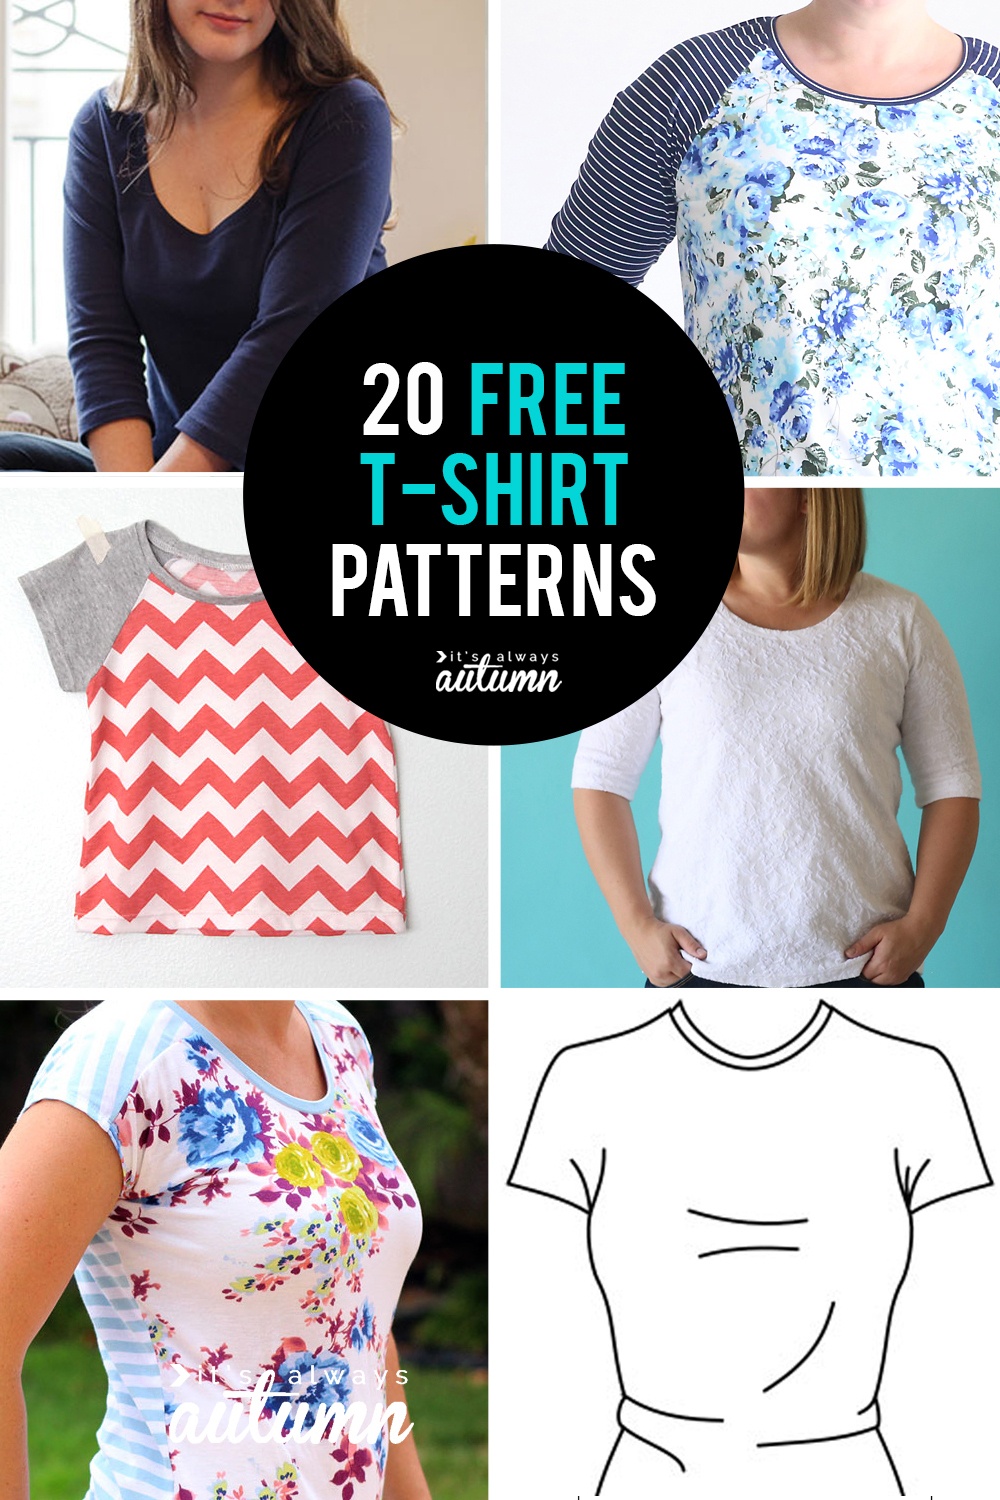 20 Free T-Shirt Patterns You Can Print + Sew At Home - It&amp;#039;s Always - Free Printable Blouse Sewing Patterns